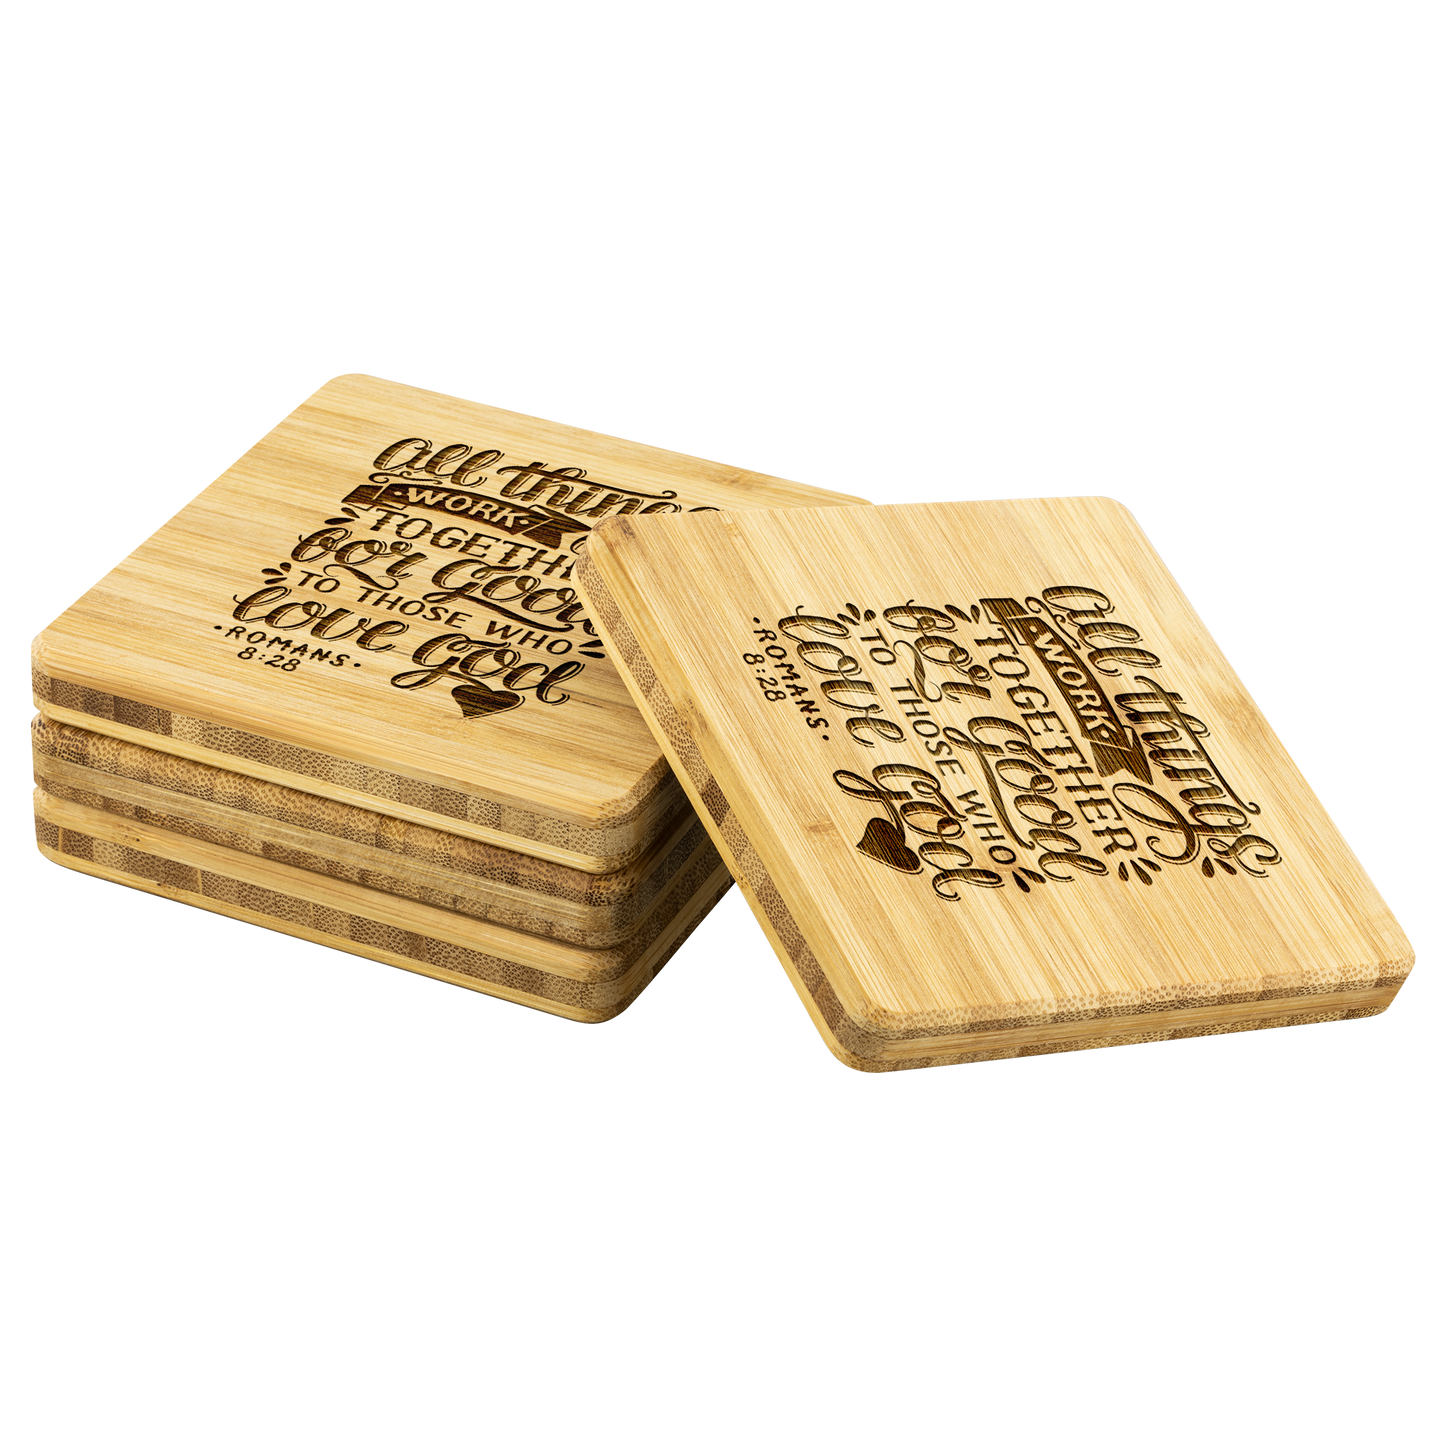 All Things Work Together For Good To Those Who Love God - Bamboo Coasters sideway stack